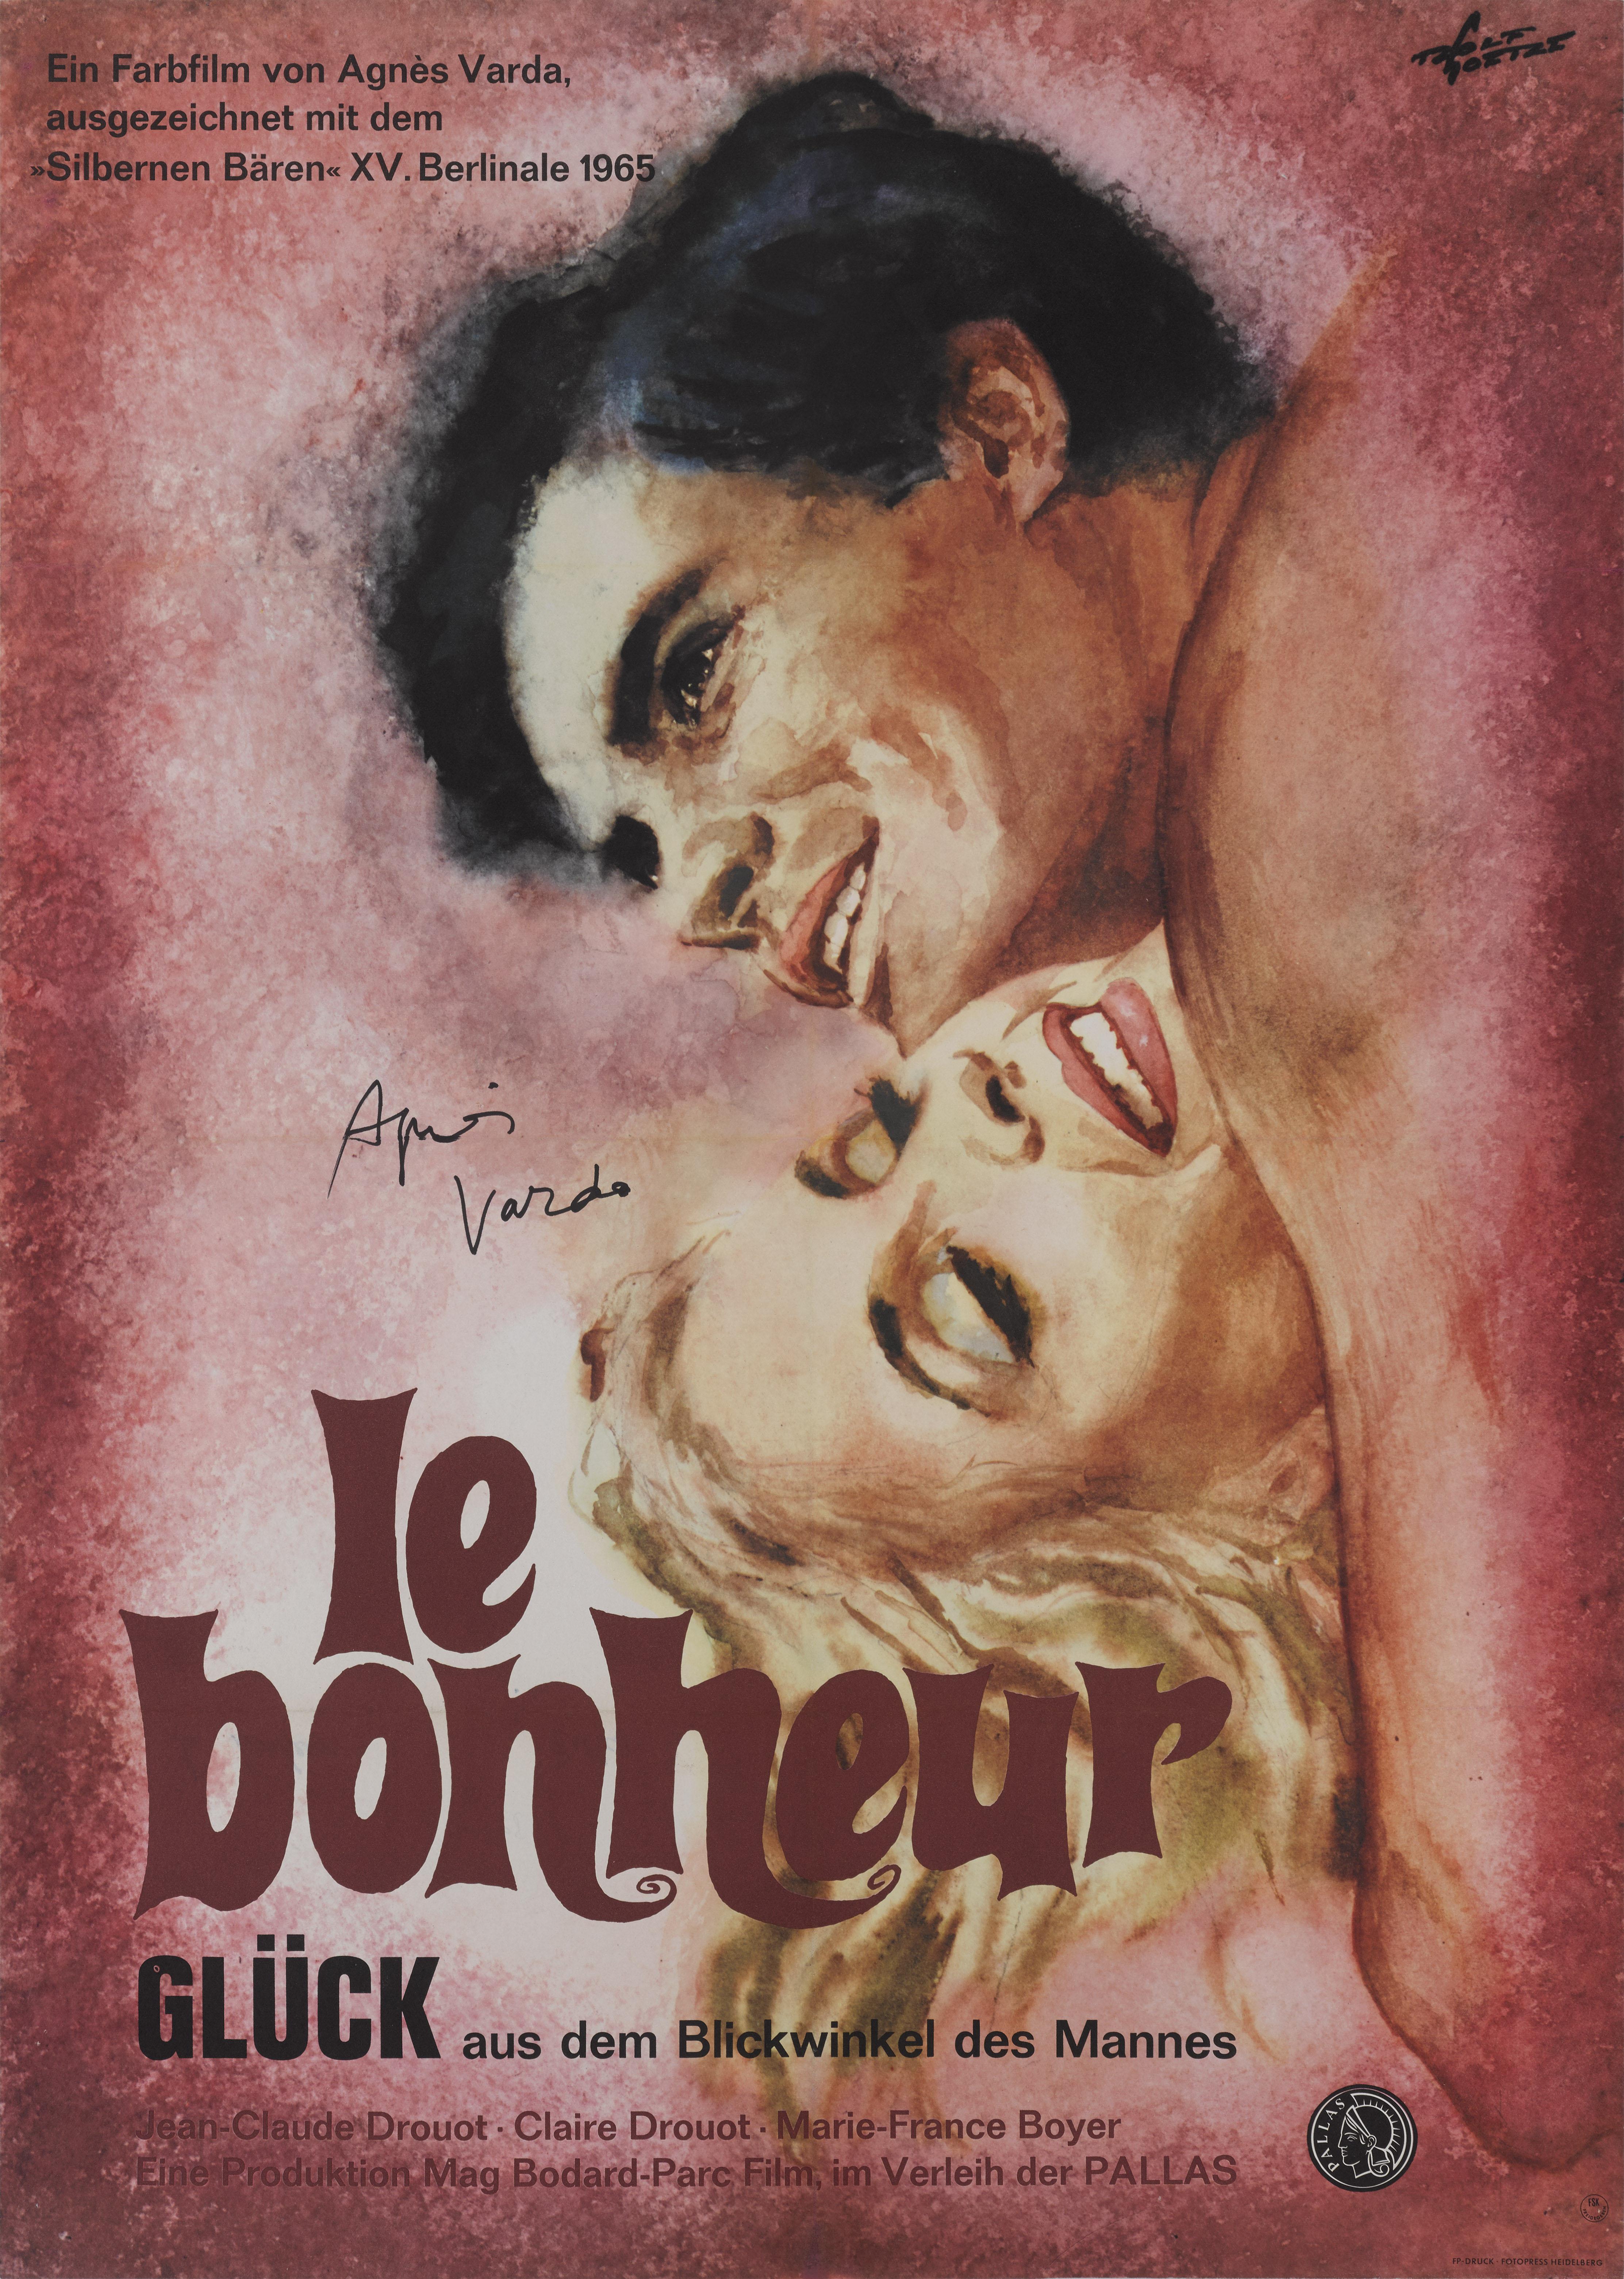 Original German film poster for the 1965 French New Wave film Le Bonheur (happiness) the film was directed by Agnès Varda and starring Jean-Claude Drouot, Marie-France Boyer and Marcelle Faure-Bertin. It is the story of a happily married young